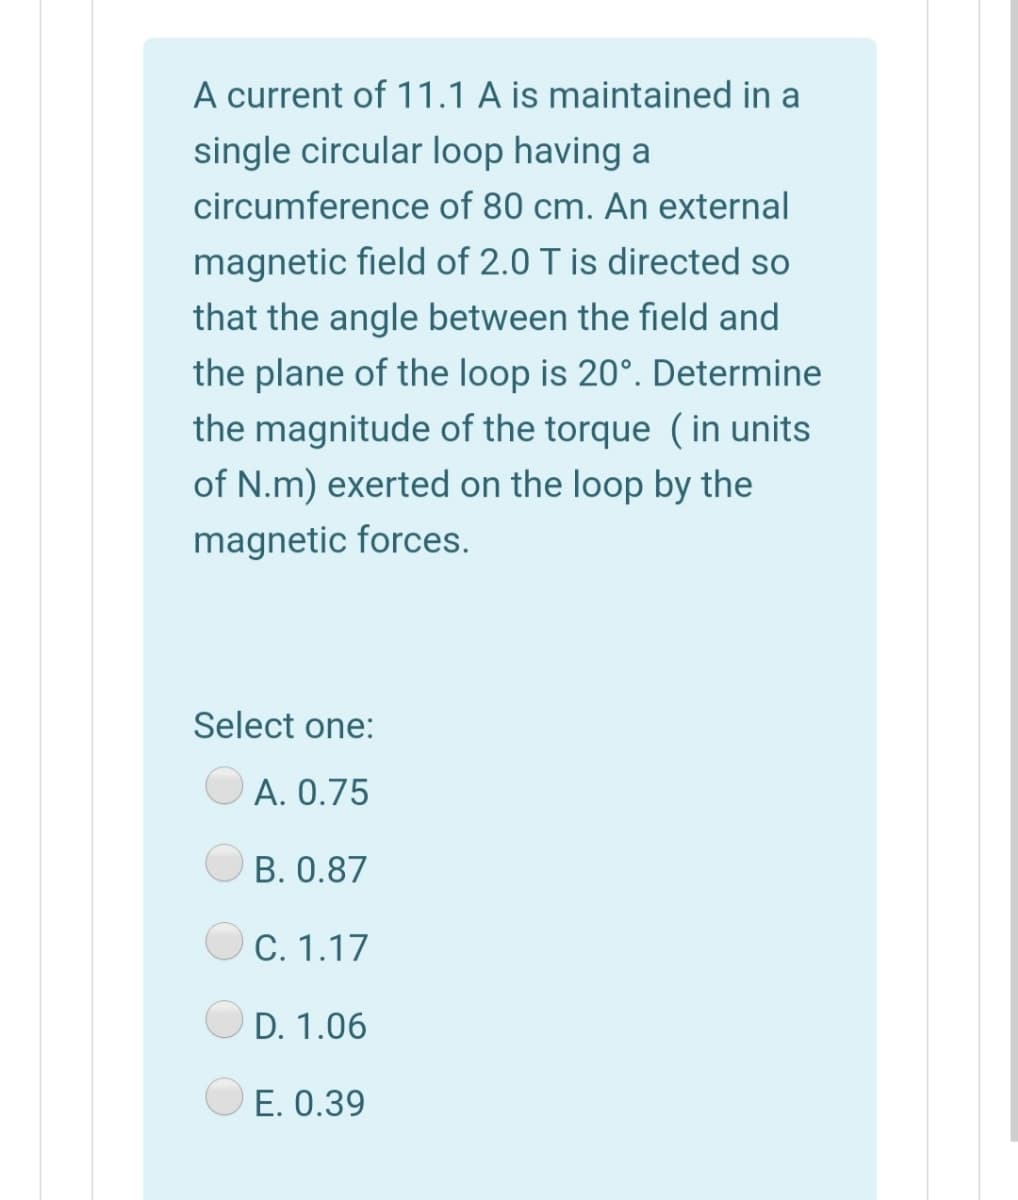 A current of 11.1 A is maintained in a
single circular loop having a
circumference of 80 cm. An external
magnetic field of 2.0 T is directed so
that the angle between the field and
the plane of the loop is 20°. Determine
the magnitude of the torque (in units
of N.m) exerted on the loop by the
magnetic forces.
Select one:
A. 0.75
B. 0.87
C. 1.17
D. 1.06
E. 0.39
